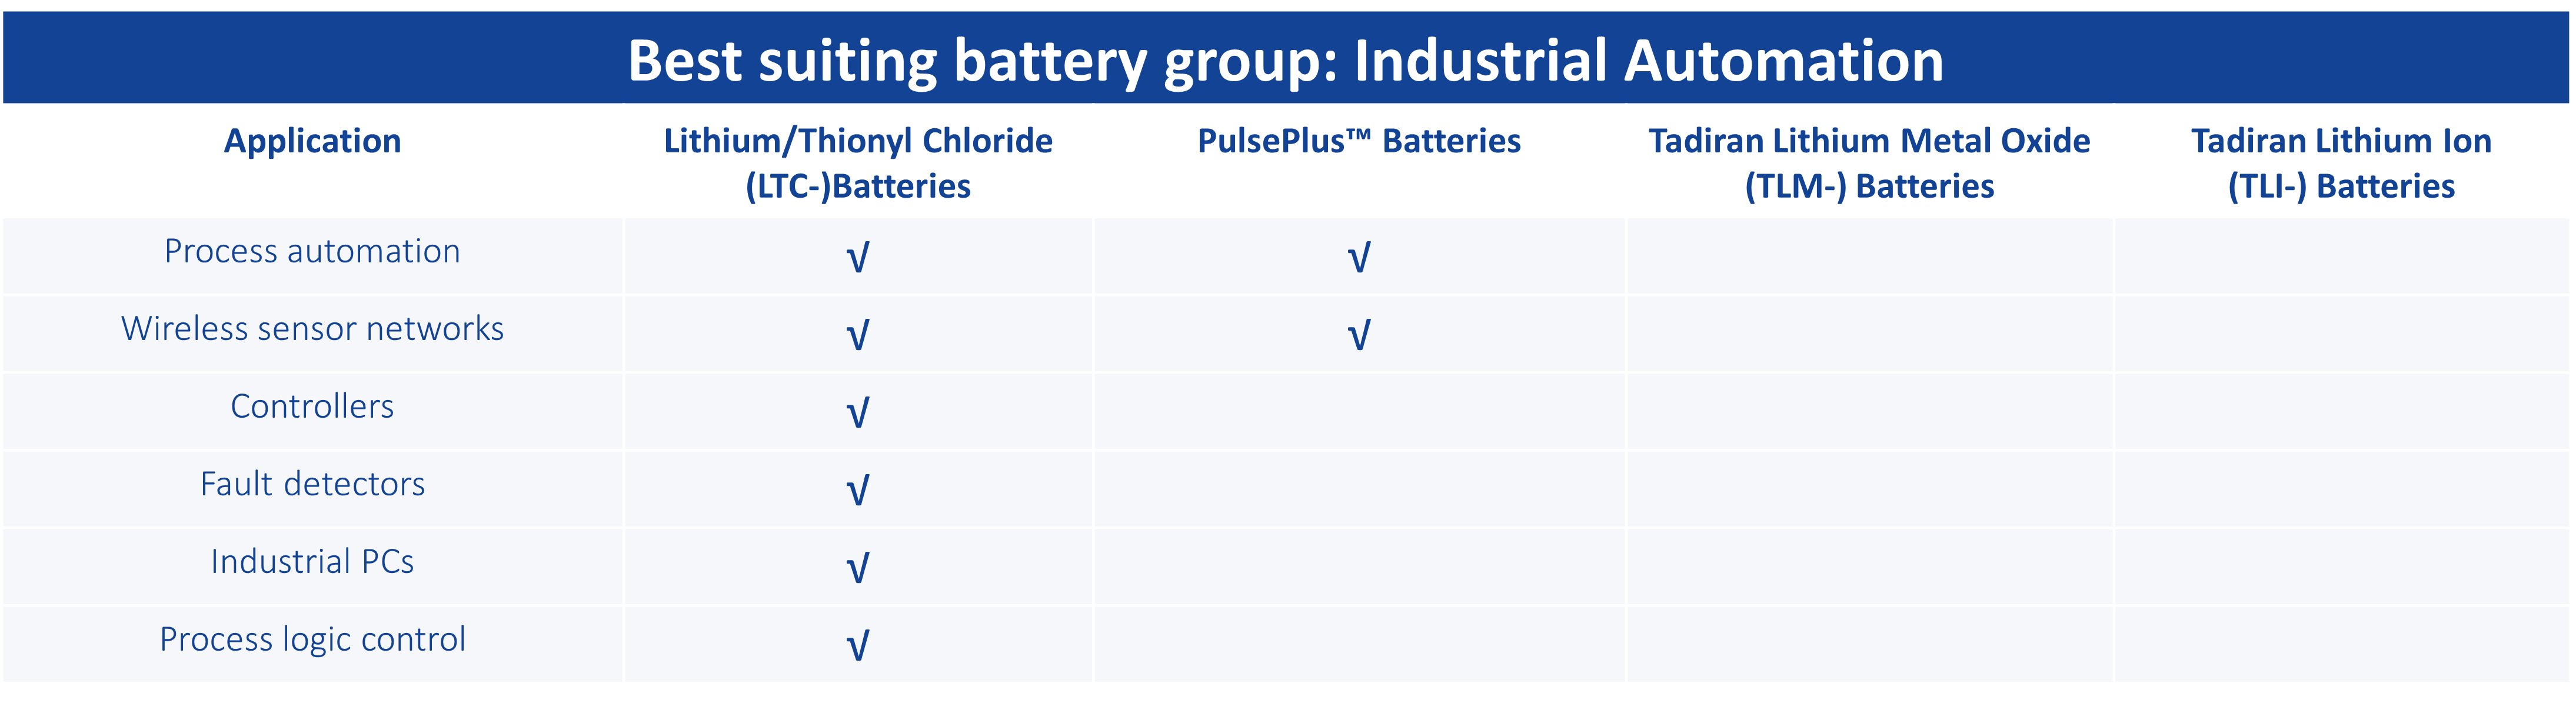 Batteries for Industrial Automation Applications